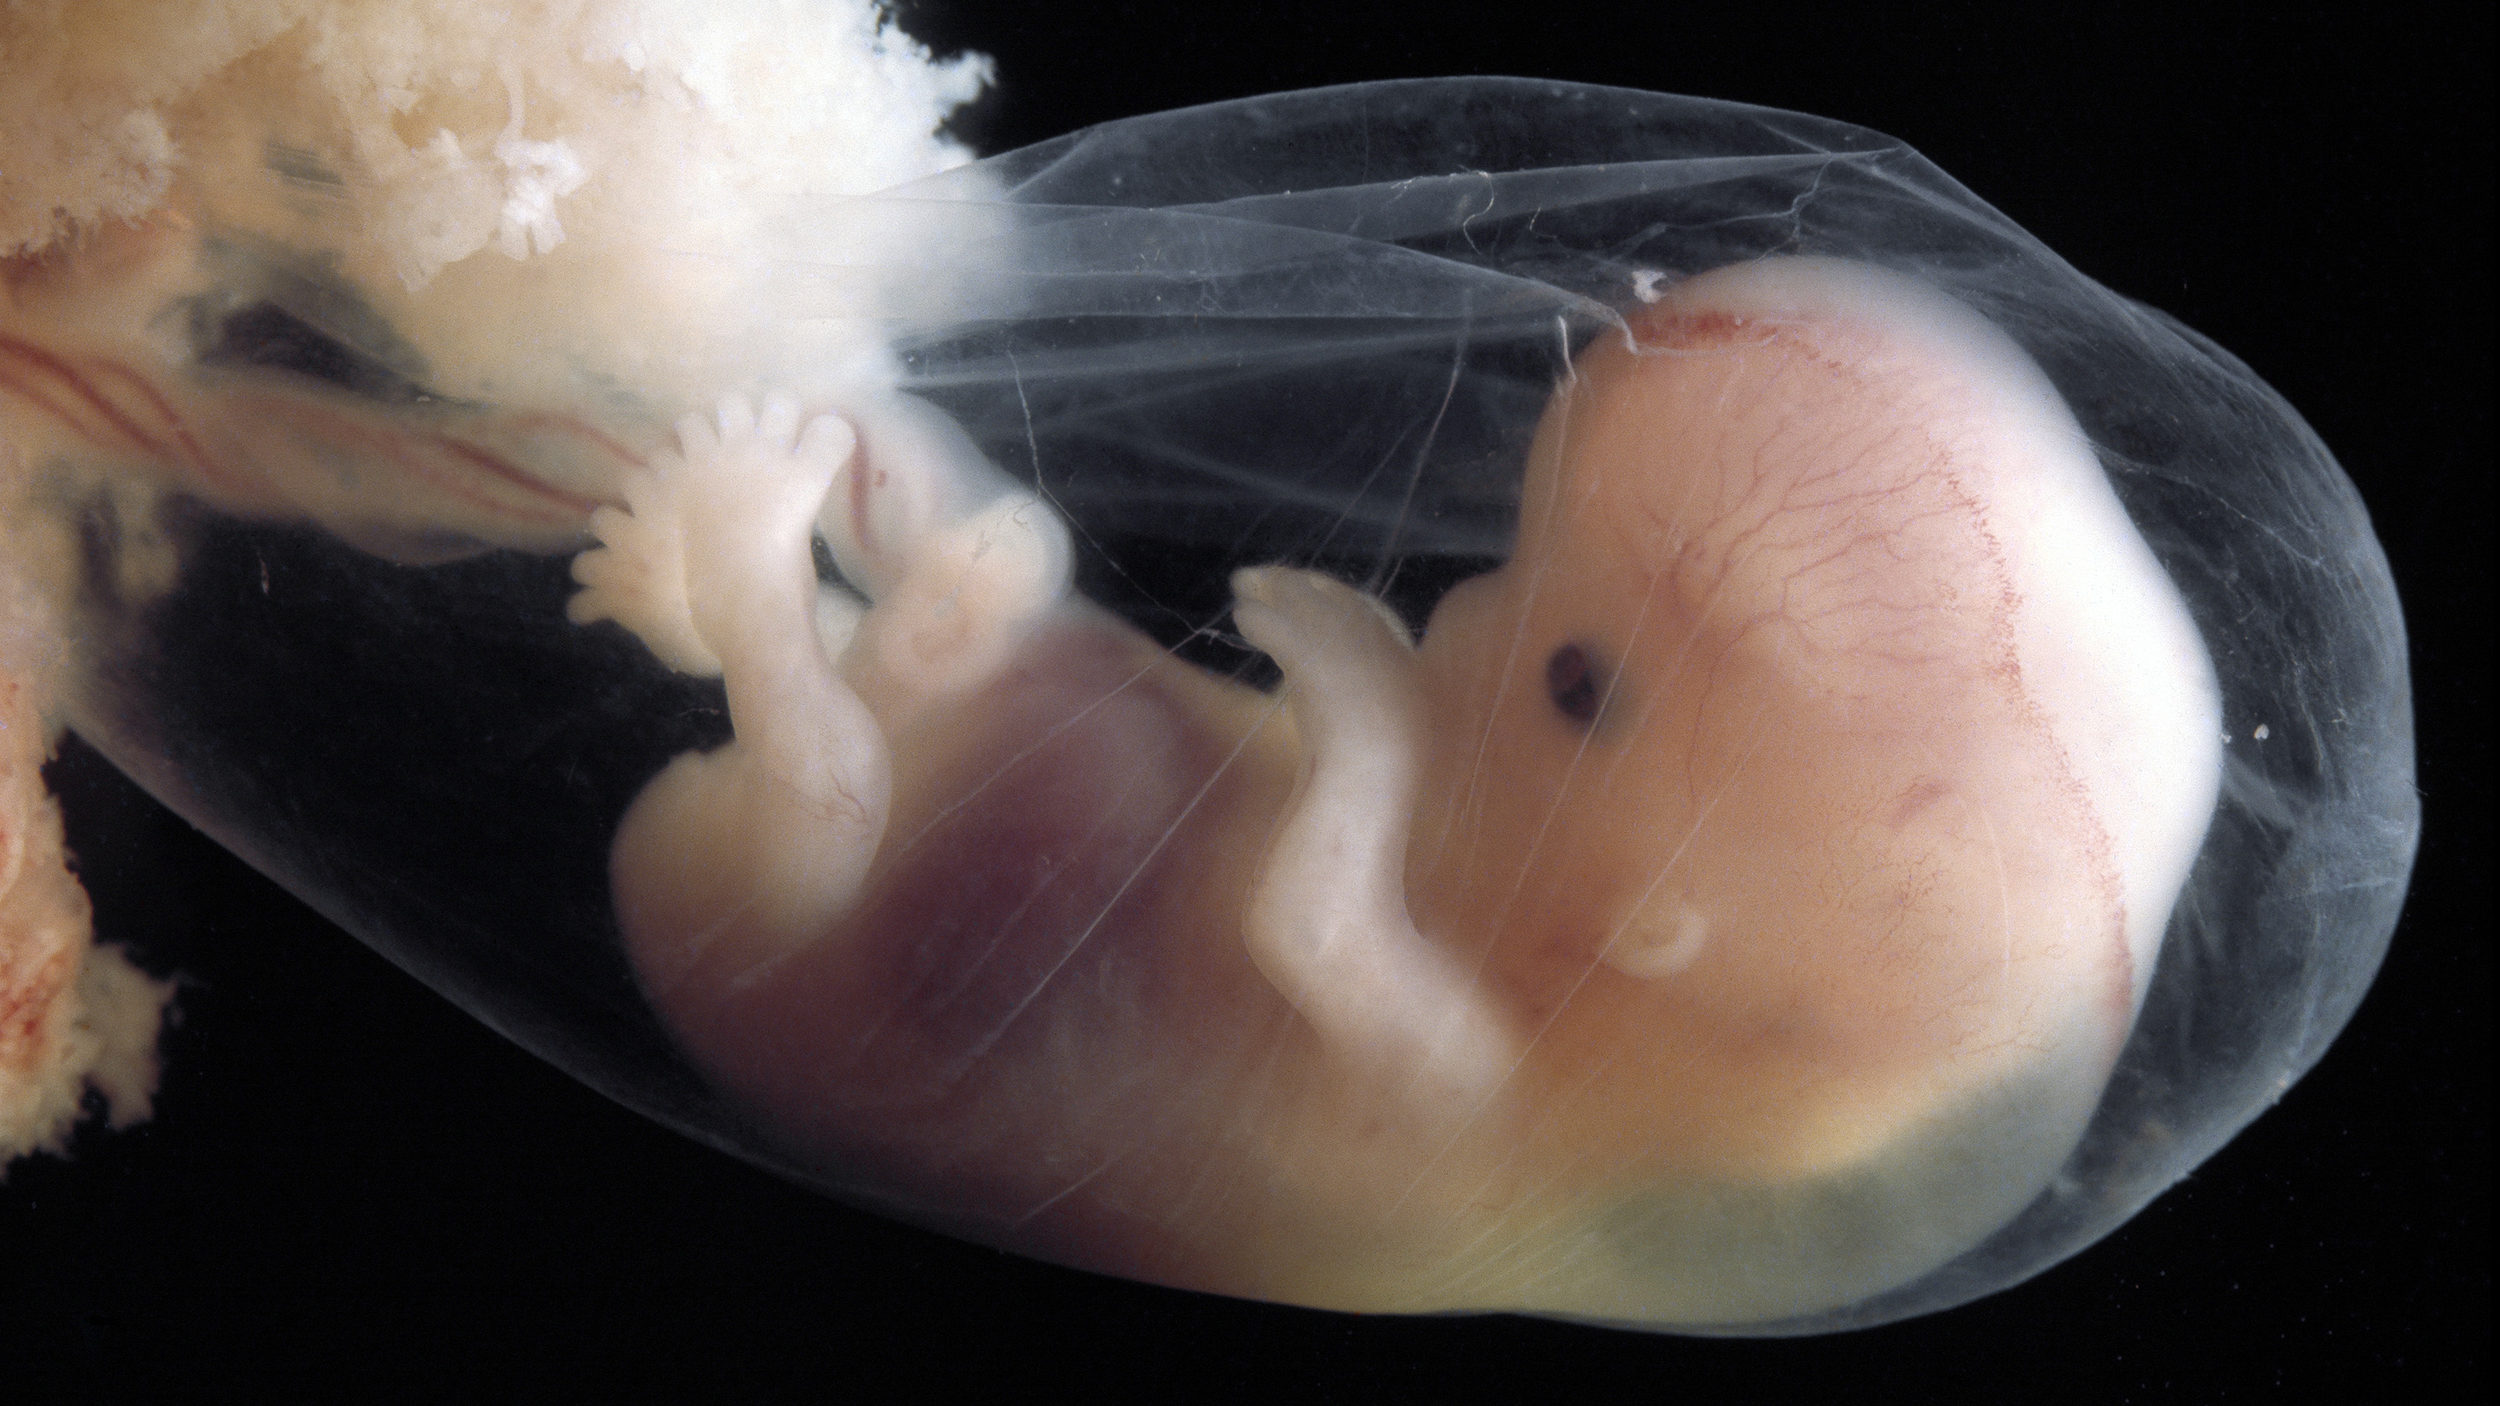 An image of a fetus in an incubator.